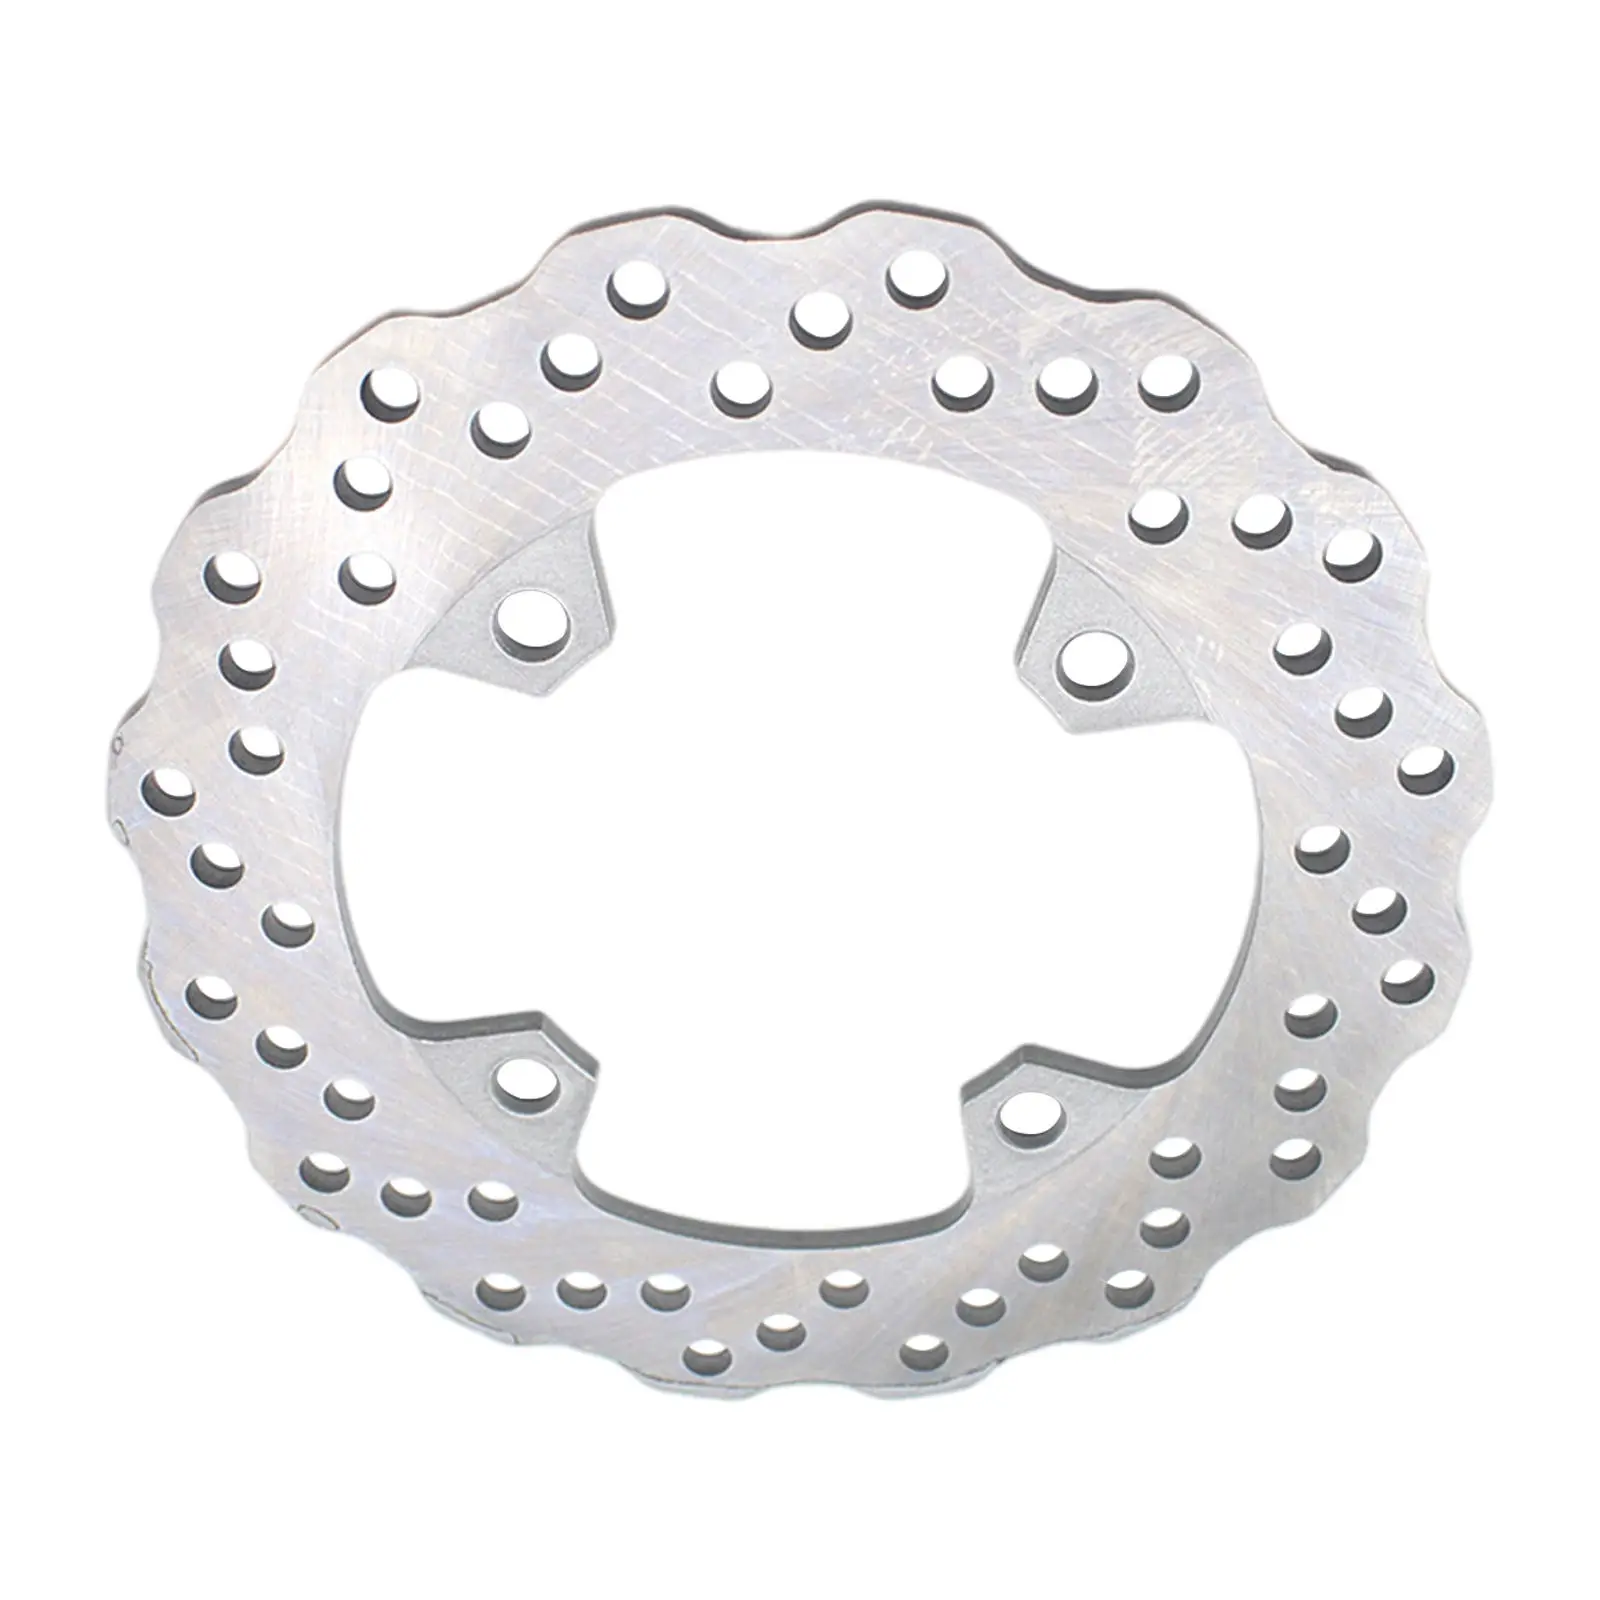 Rear Brake Disc Rotor Silver Motorcycle Replacement 220mm Accessories Steel for Kawasaki ER6F Z750 ZX6R ZX636 ER-6F ER-6N ER6N